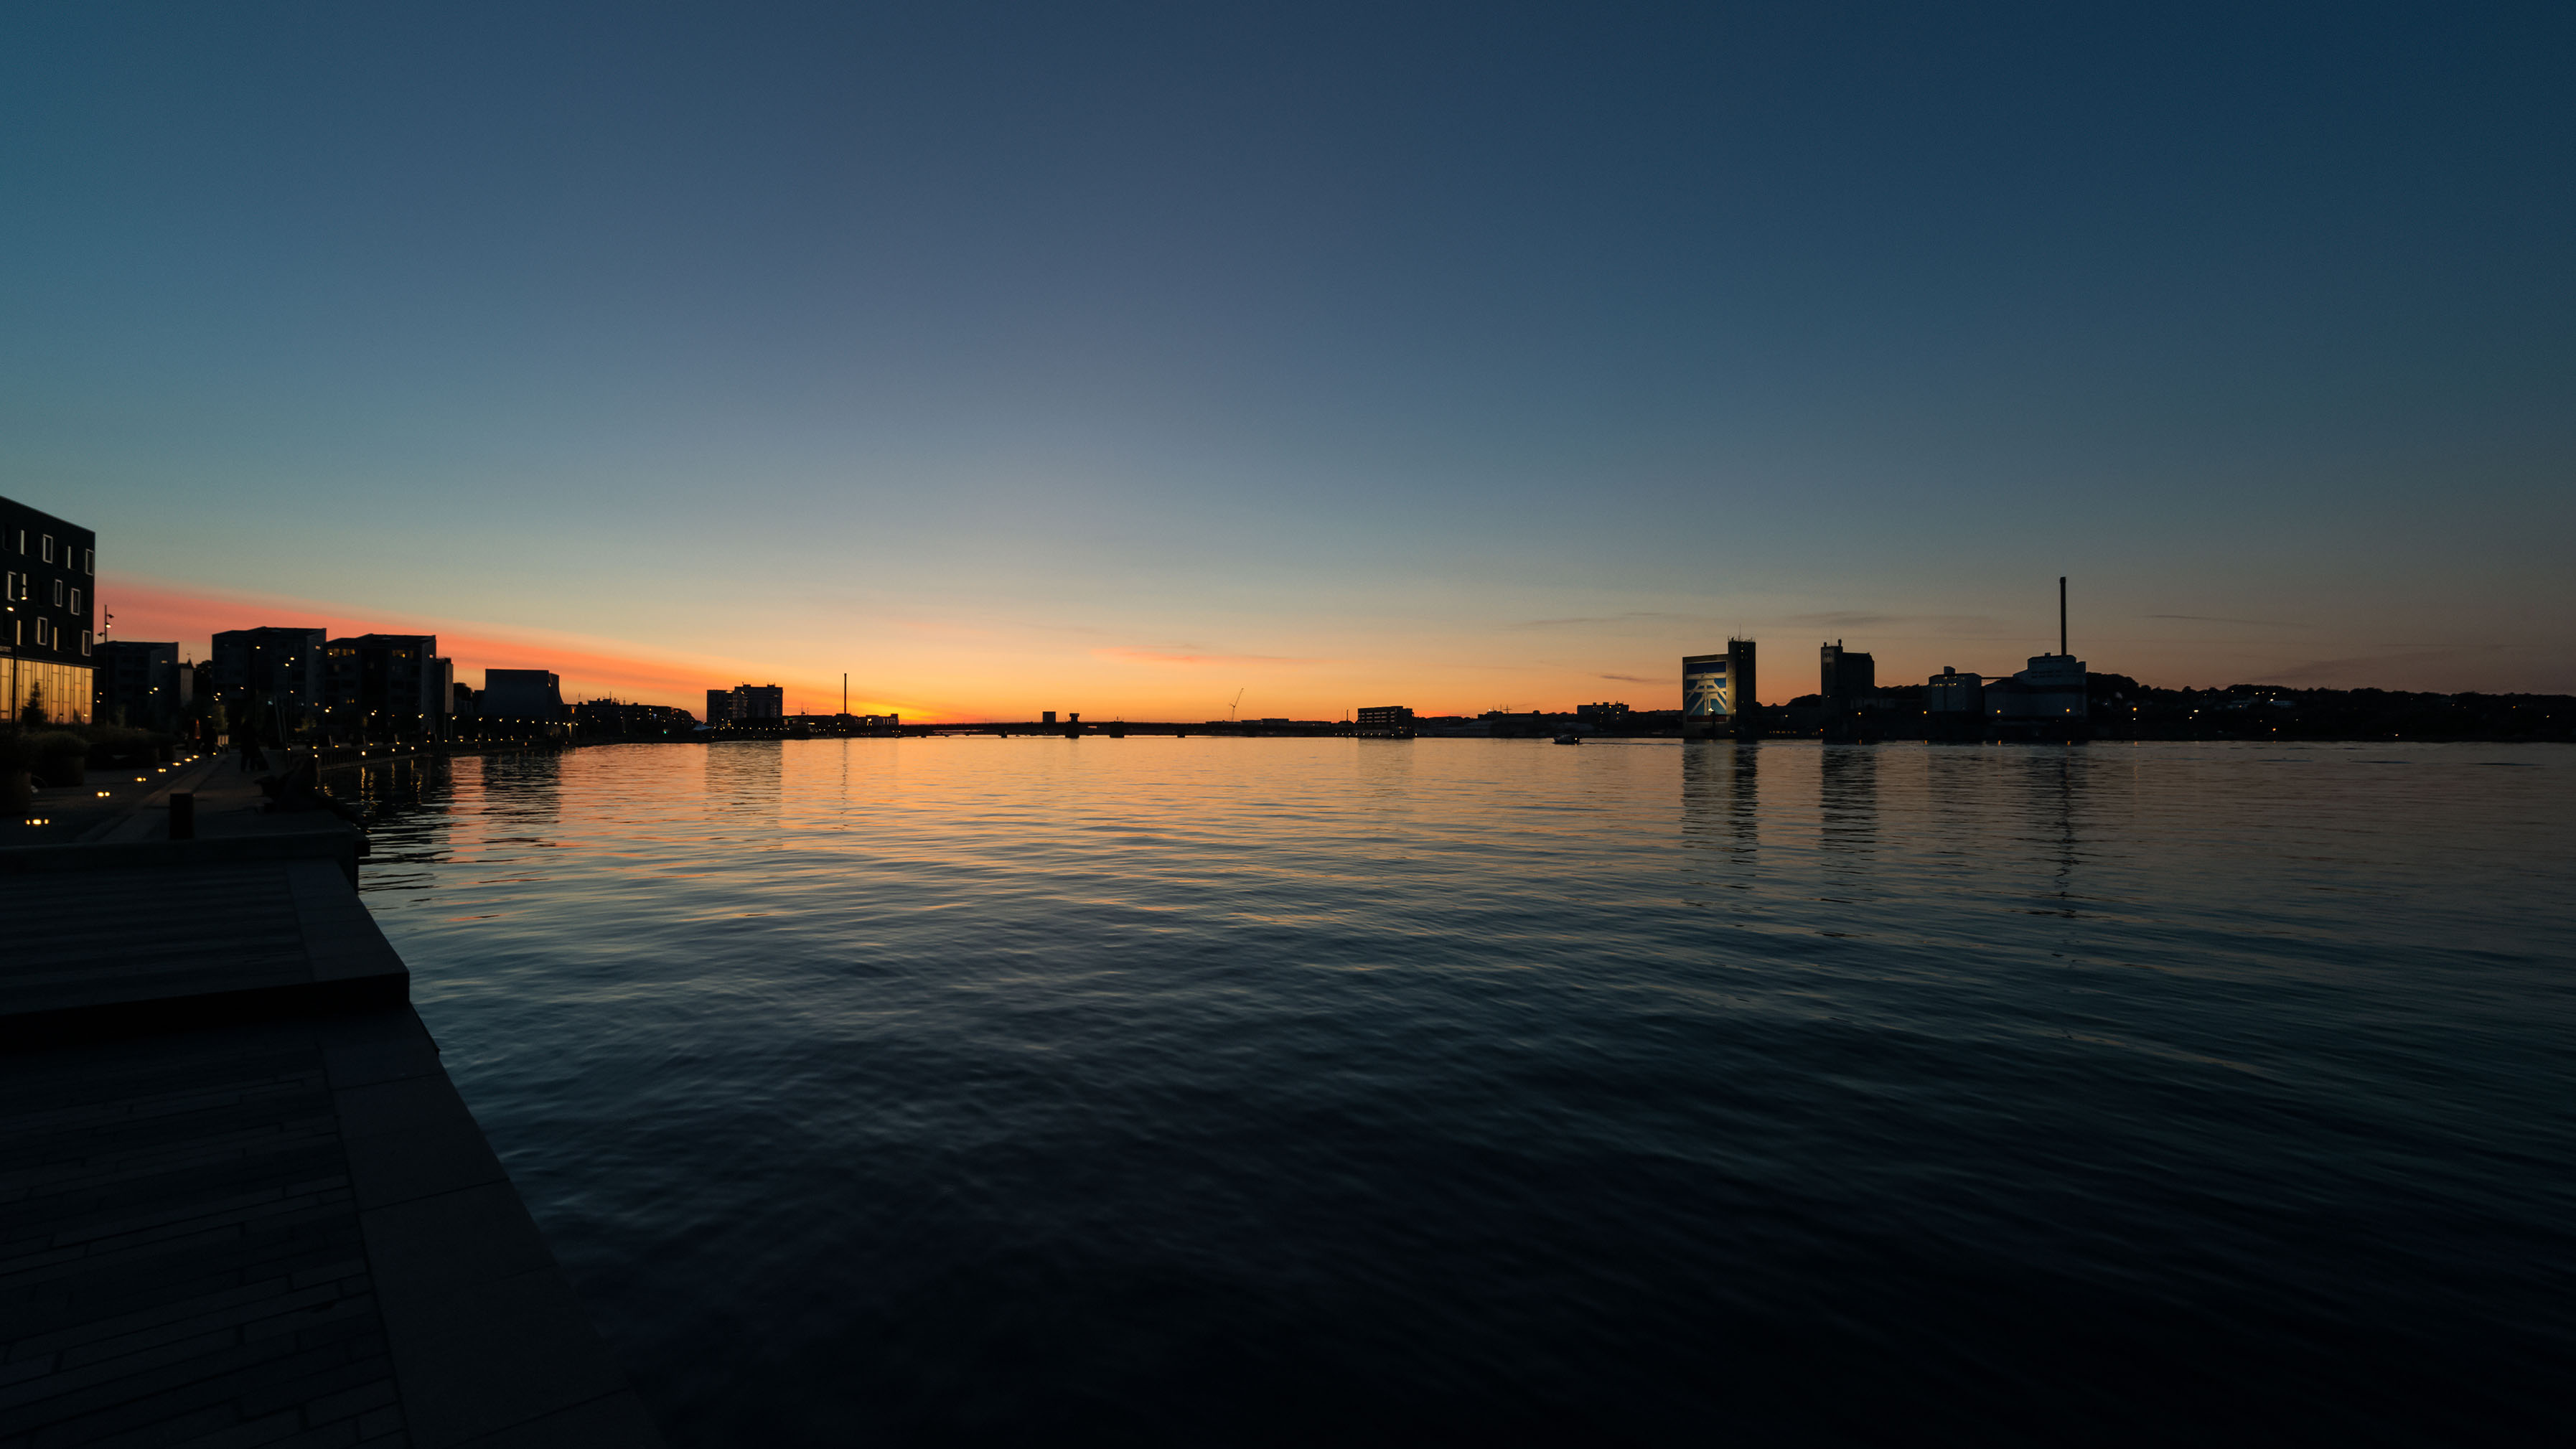 Photo of the Limfjord in Aalborg